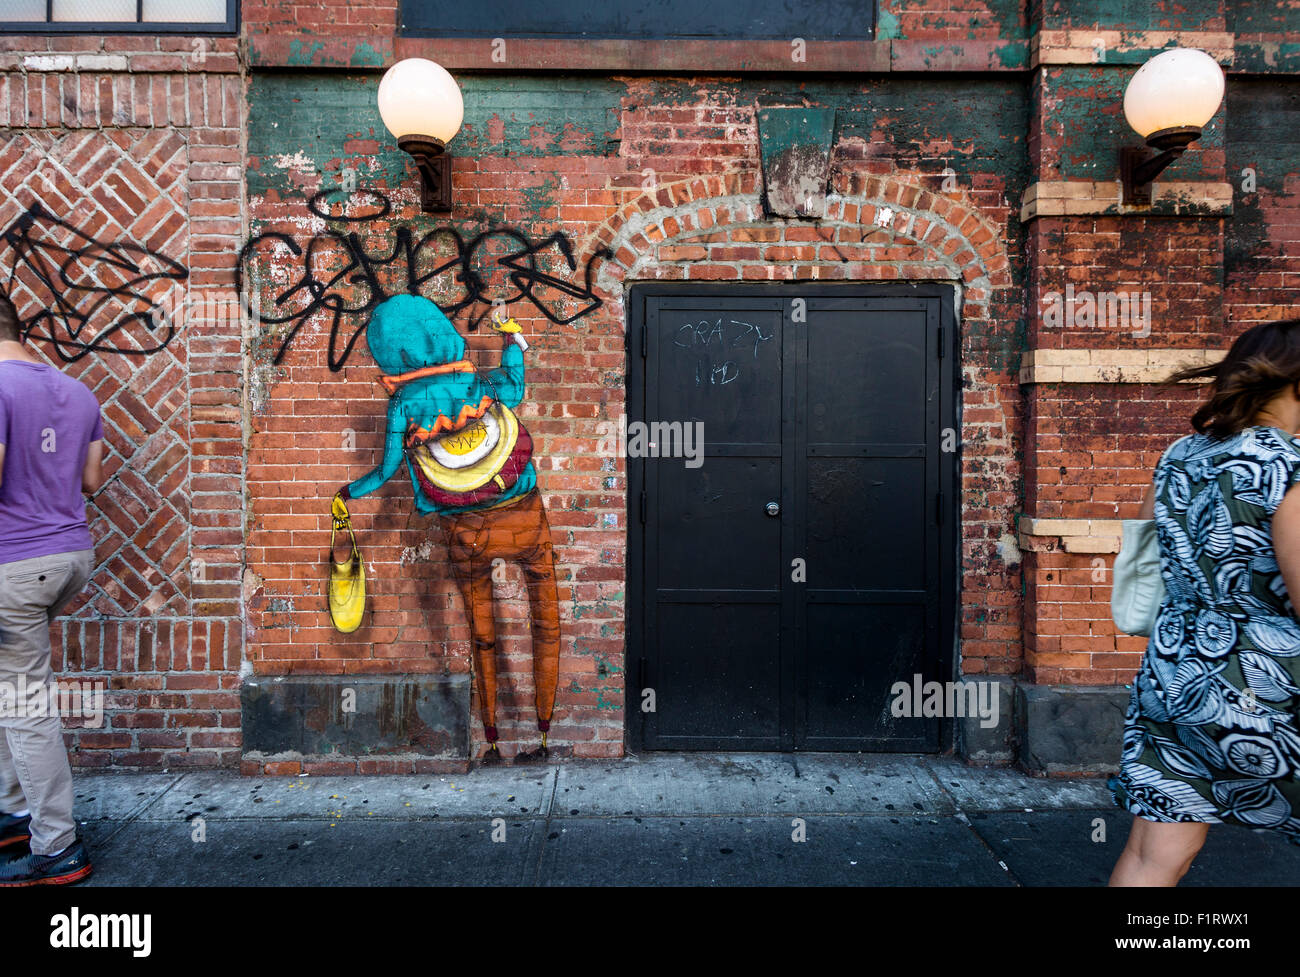 New York, NY 7 September 2015 - Wall mural by the Brazilian twin graffiti artists Os Gemeos, in the Noho neighborhood of Manhattan ©Stacy Walsh Rosenstock/Alamy Stock Photo